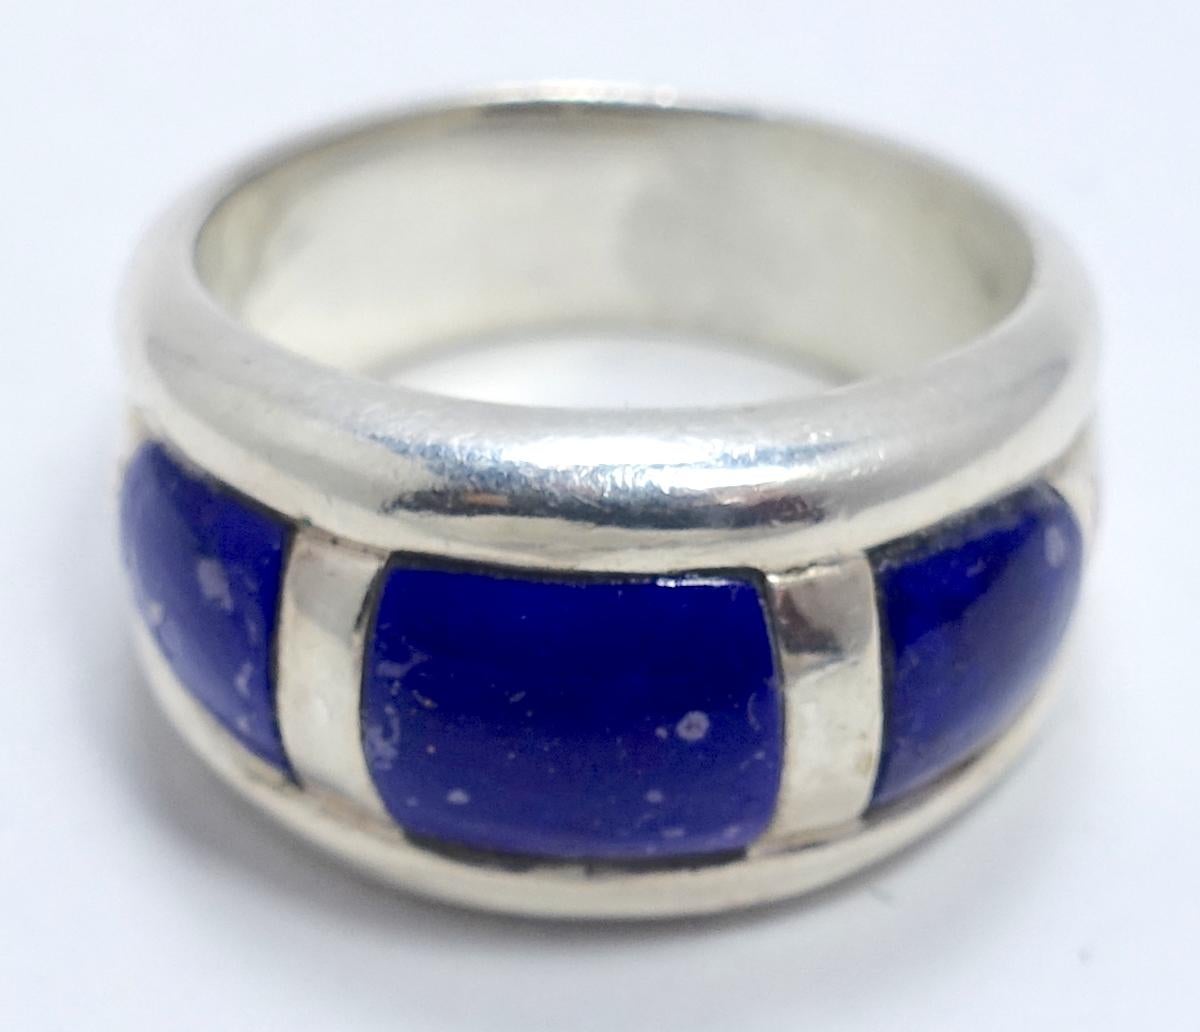 This vintage ring has lapis lazuli stones with sterling silver stripes in a sterling silver setting.  It’s a size 10 and measures 1/2” wide. It is in excellent condition.